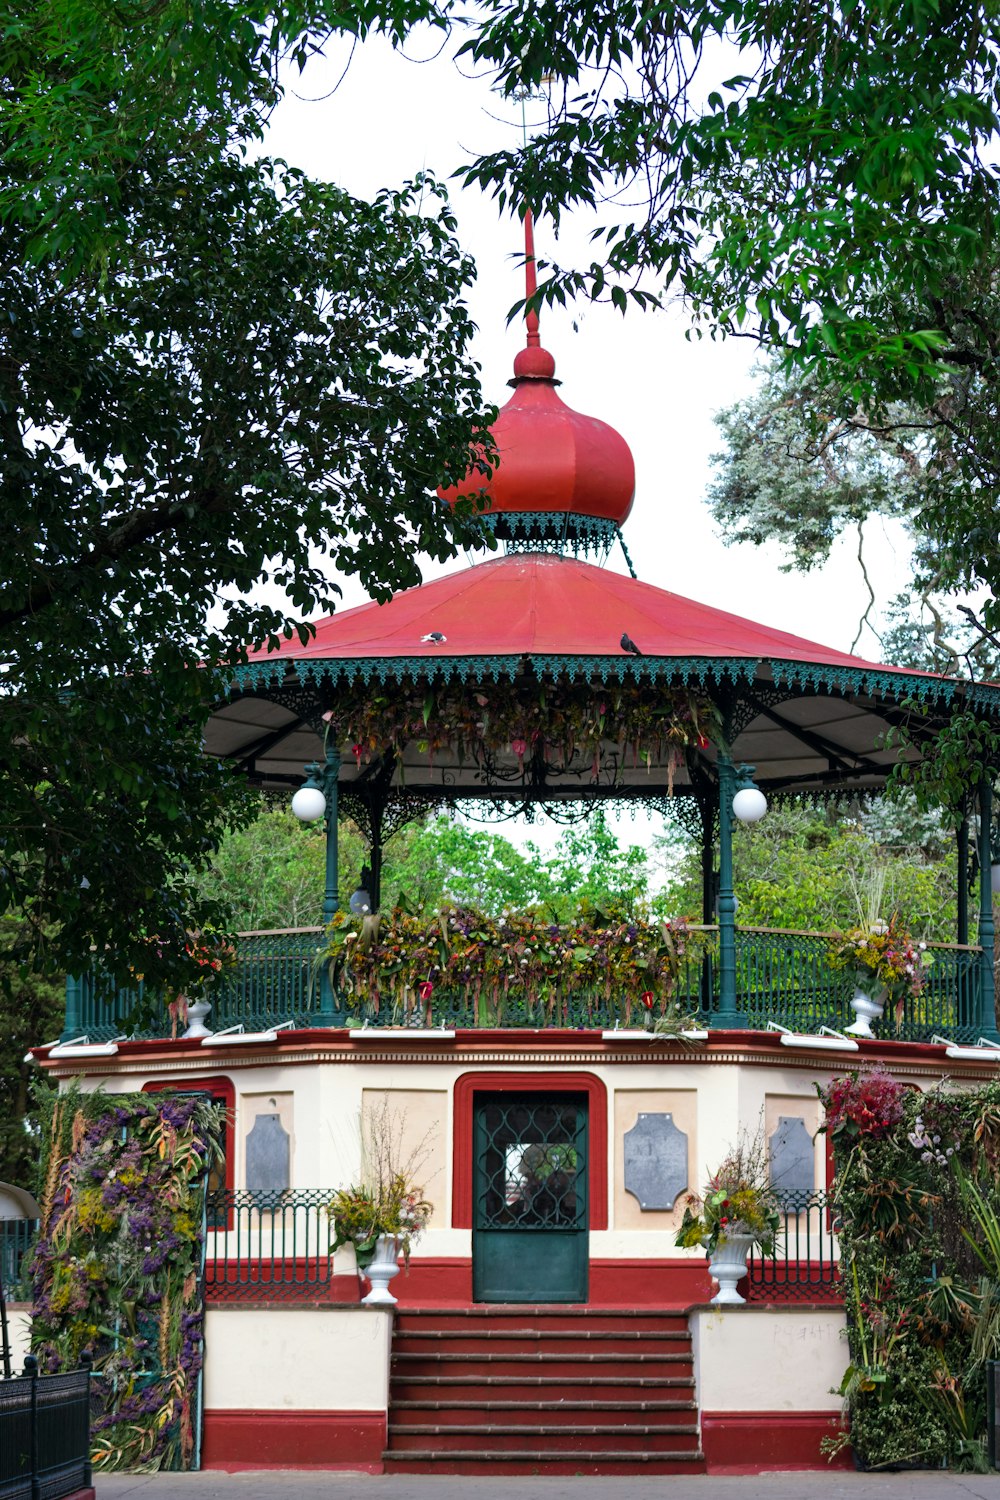 a gazebo with a red roof surrounded by greenery